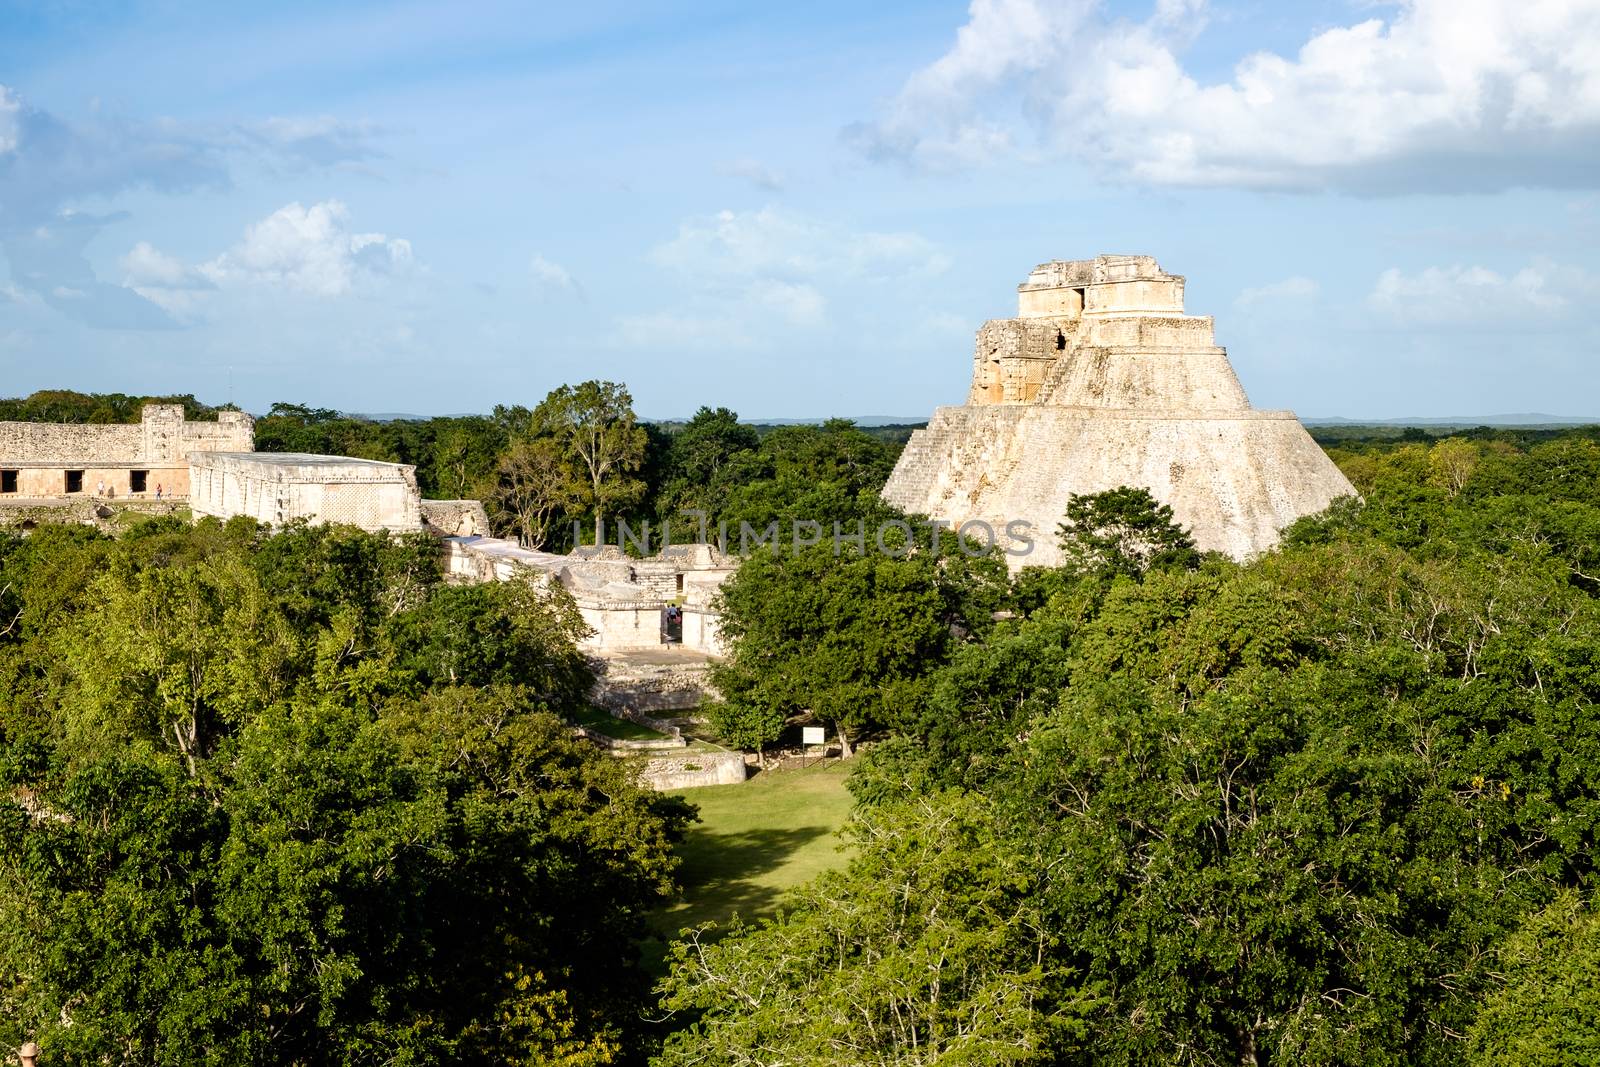 Landscape view of Uxmal archeological site with pyramids and ruins, Mexico